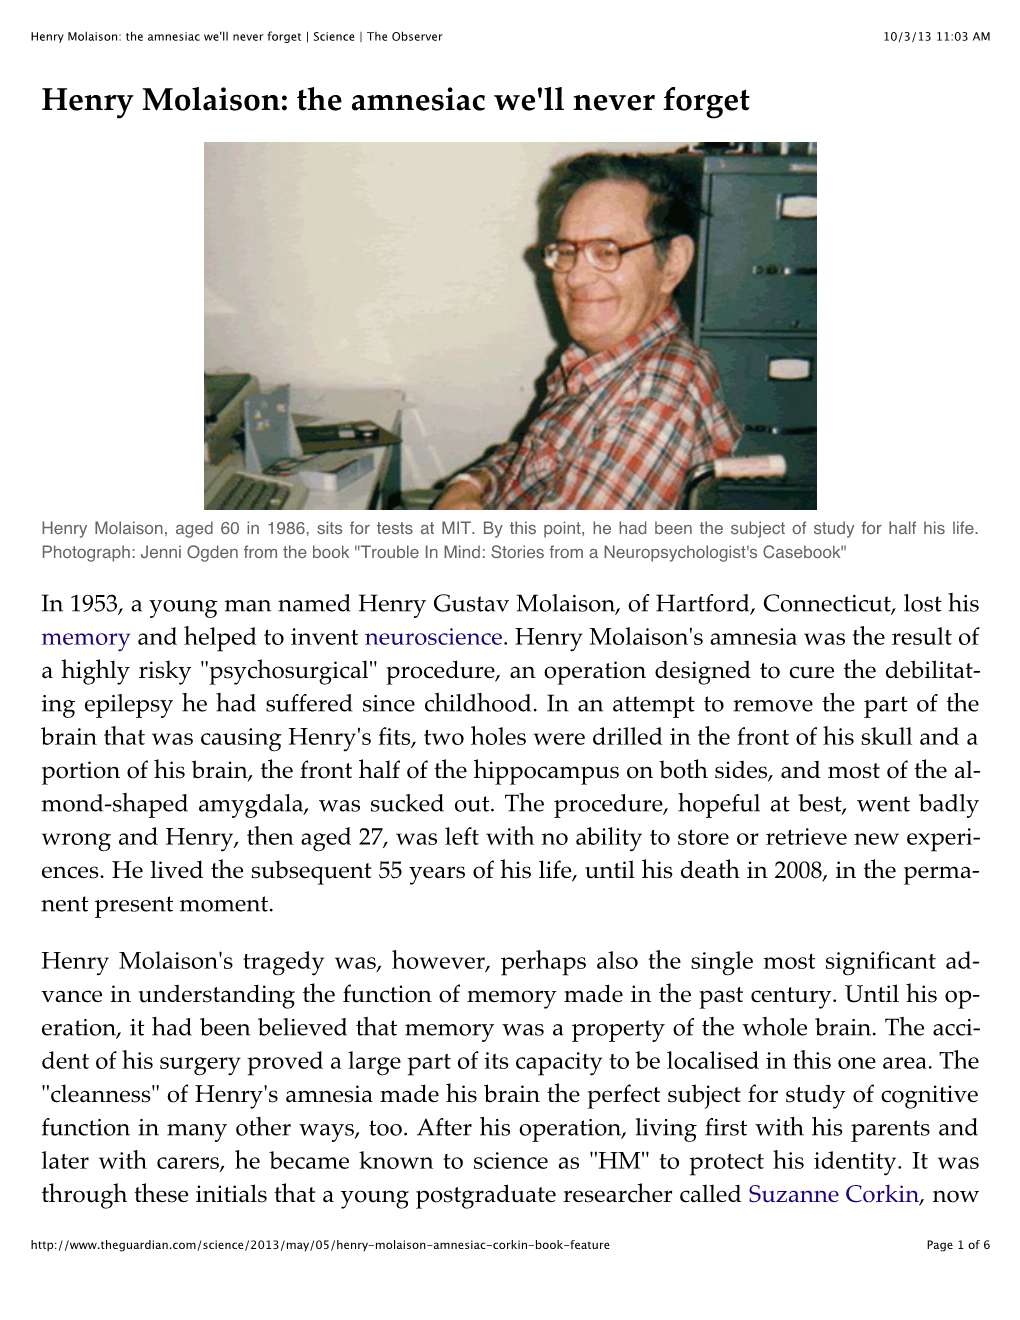 Henry Molaison: the Amnesiac We'll Never Forget | Science | the Observer 10/3/13 11:03 AM